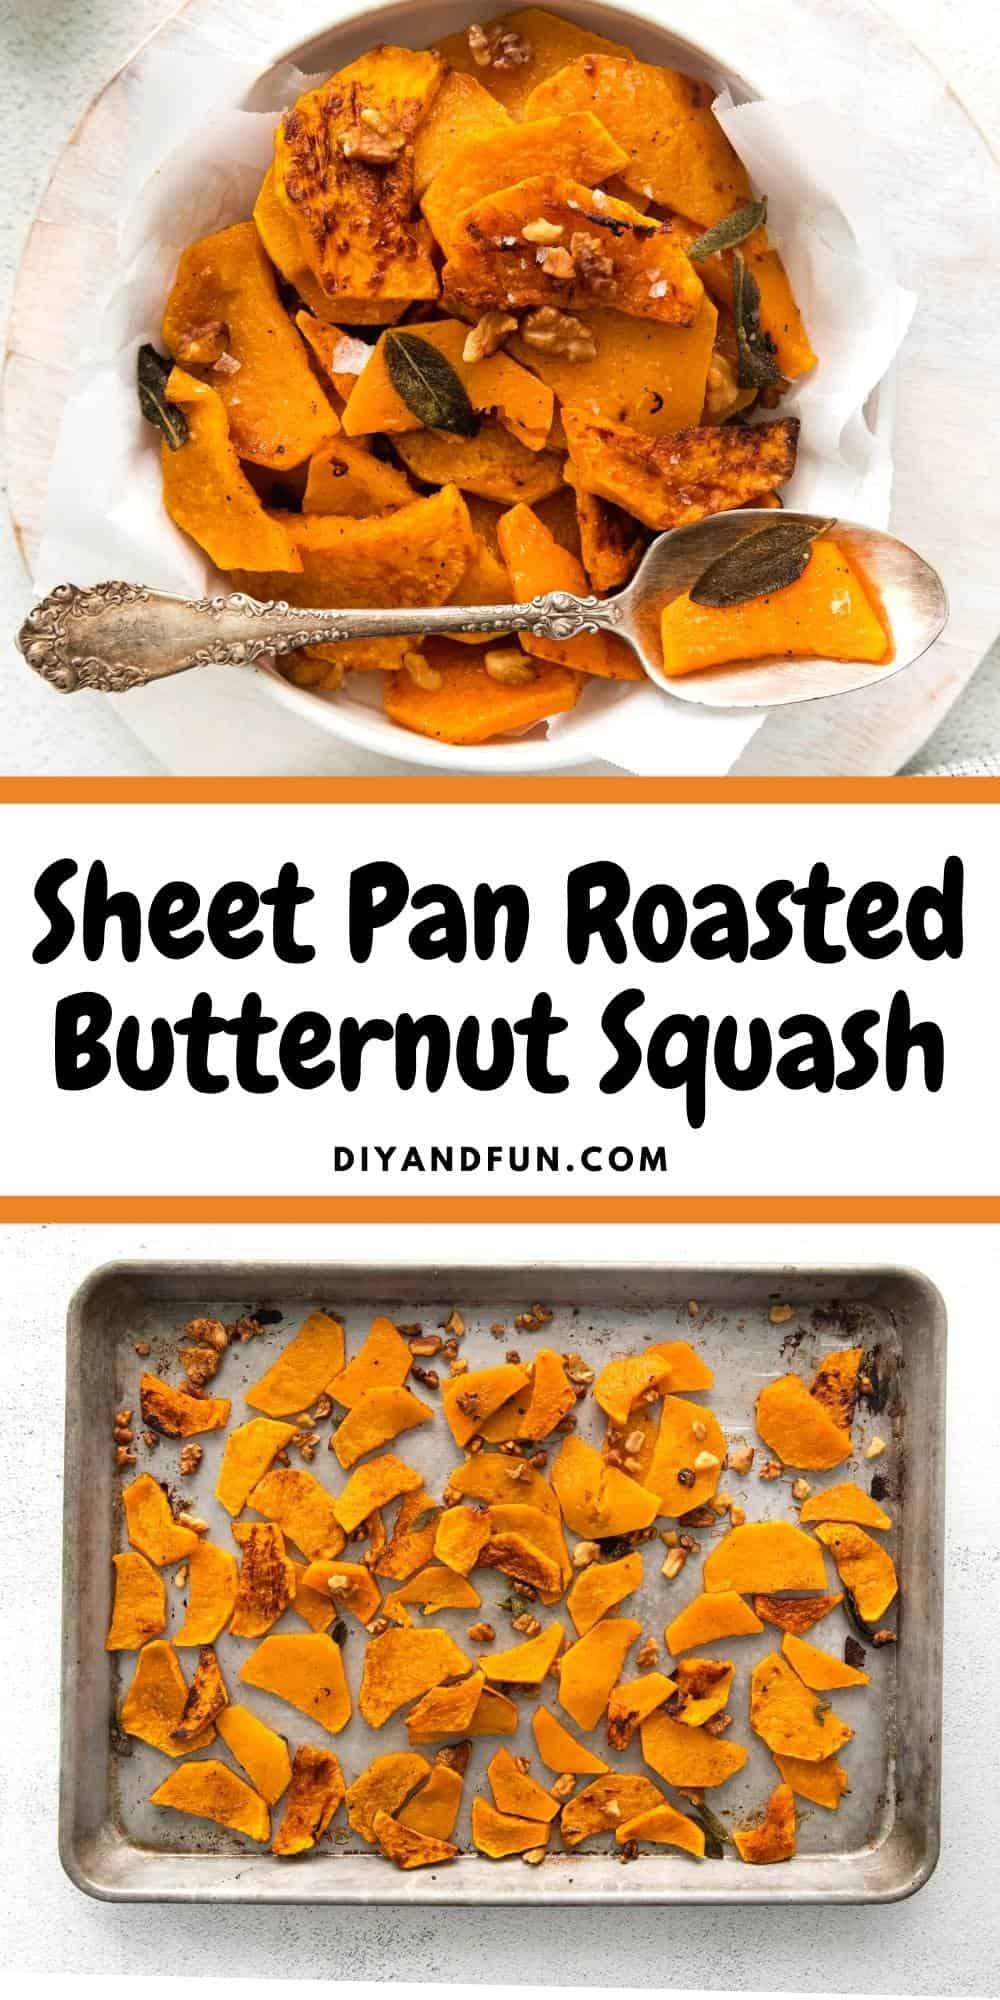 Sheet Pan Roasted Butternut Squash, a simple side dish recipe idea that is especially perfect for Thanksgiving and Christmas dinner.